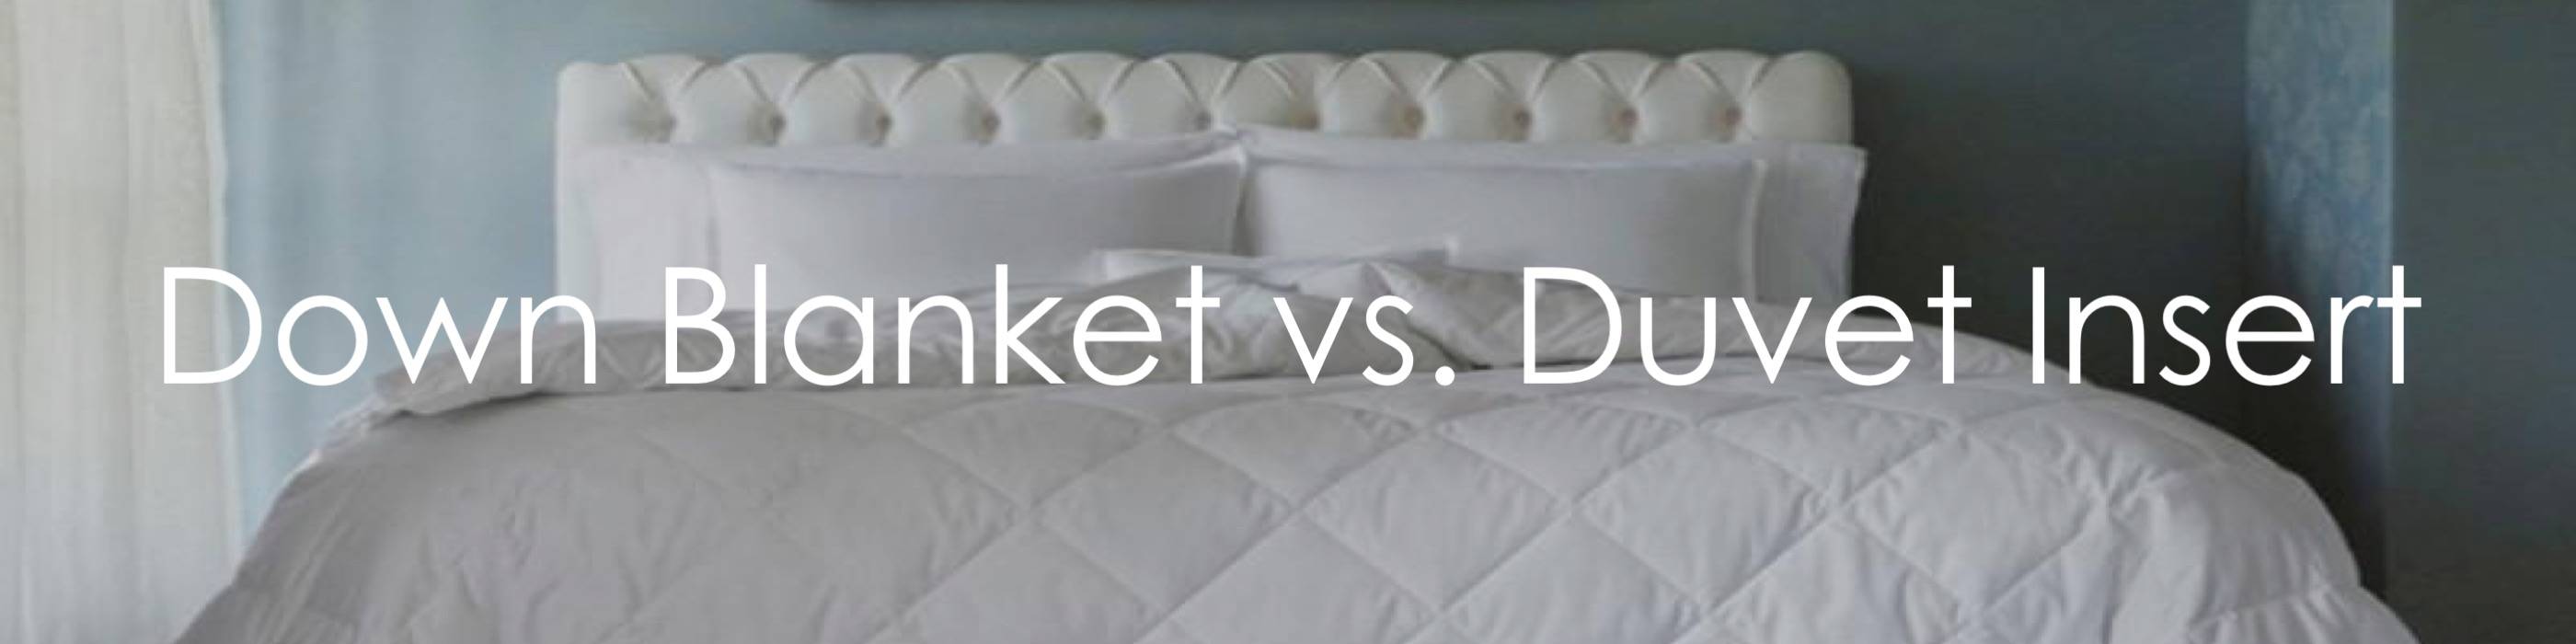 Down Blanket Cover Vs Duvet Insert, Can I Use A Duvet Cover Without An Insert